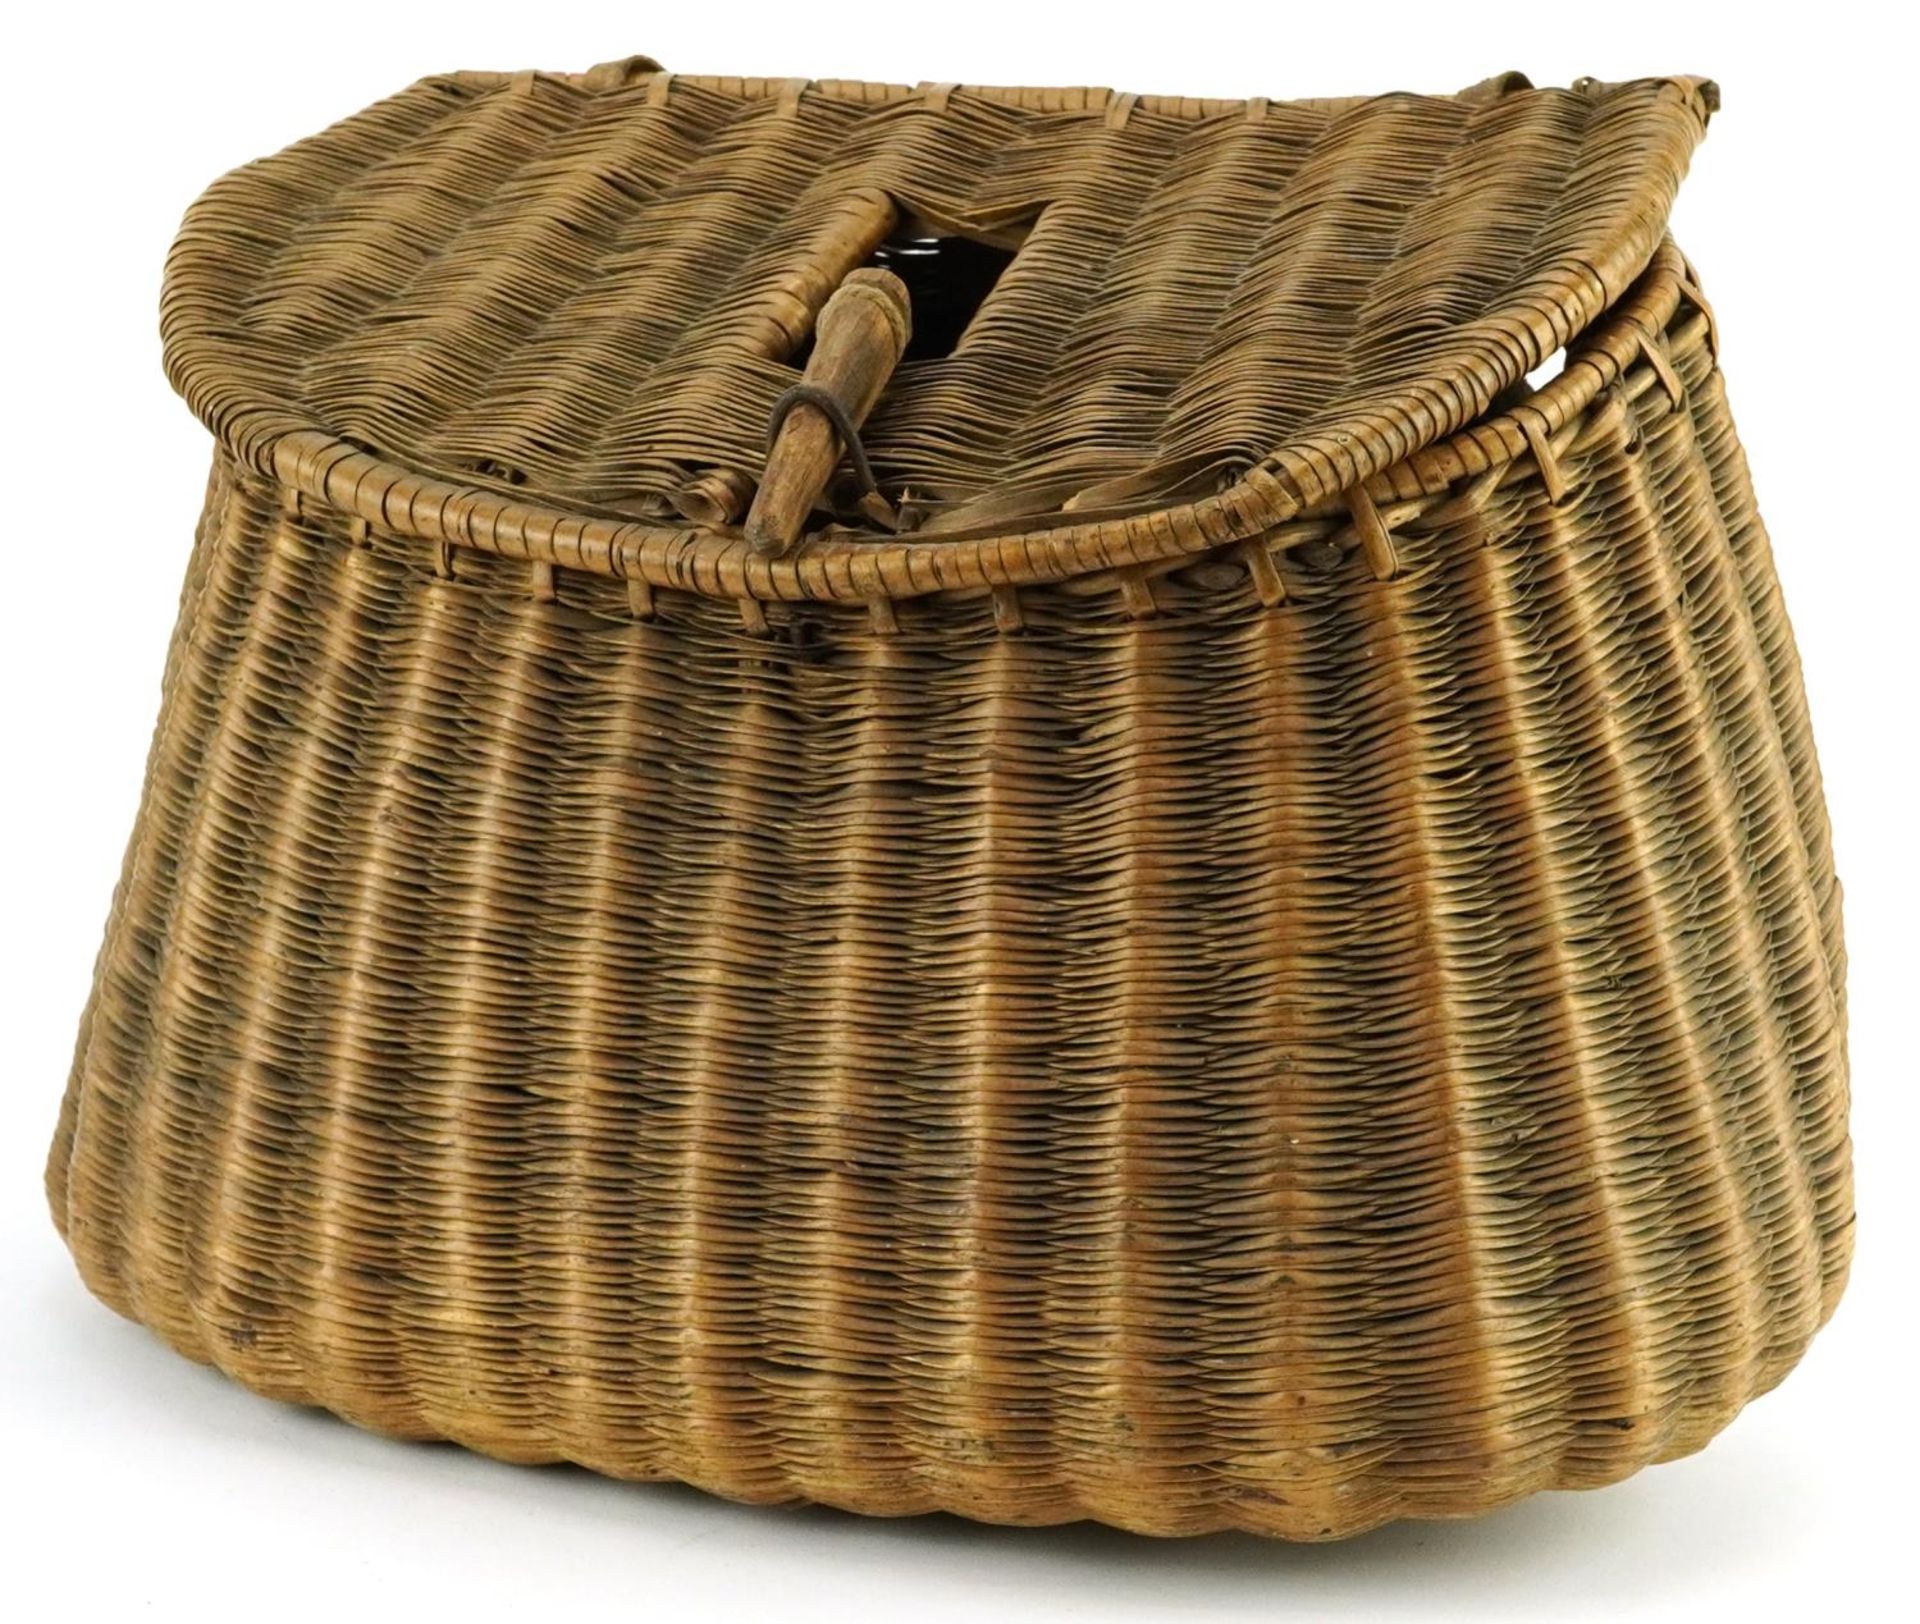 Early 20th century sporting interest angler's fishing basket, 31cm wide